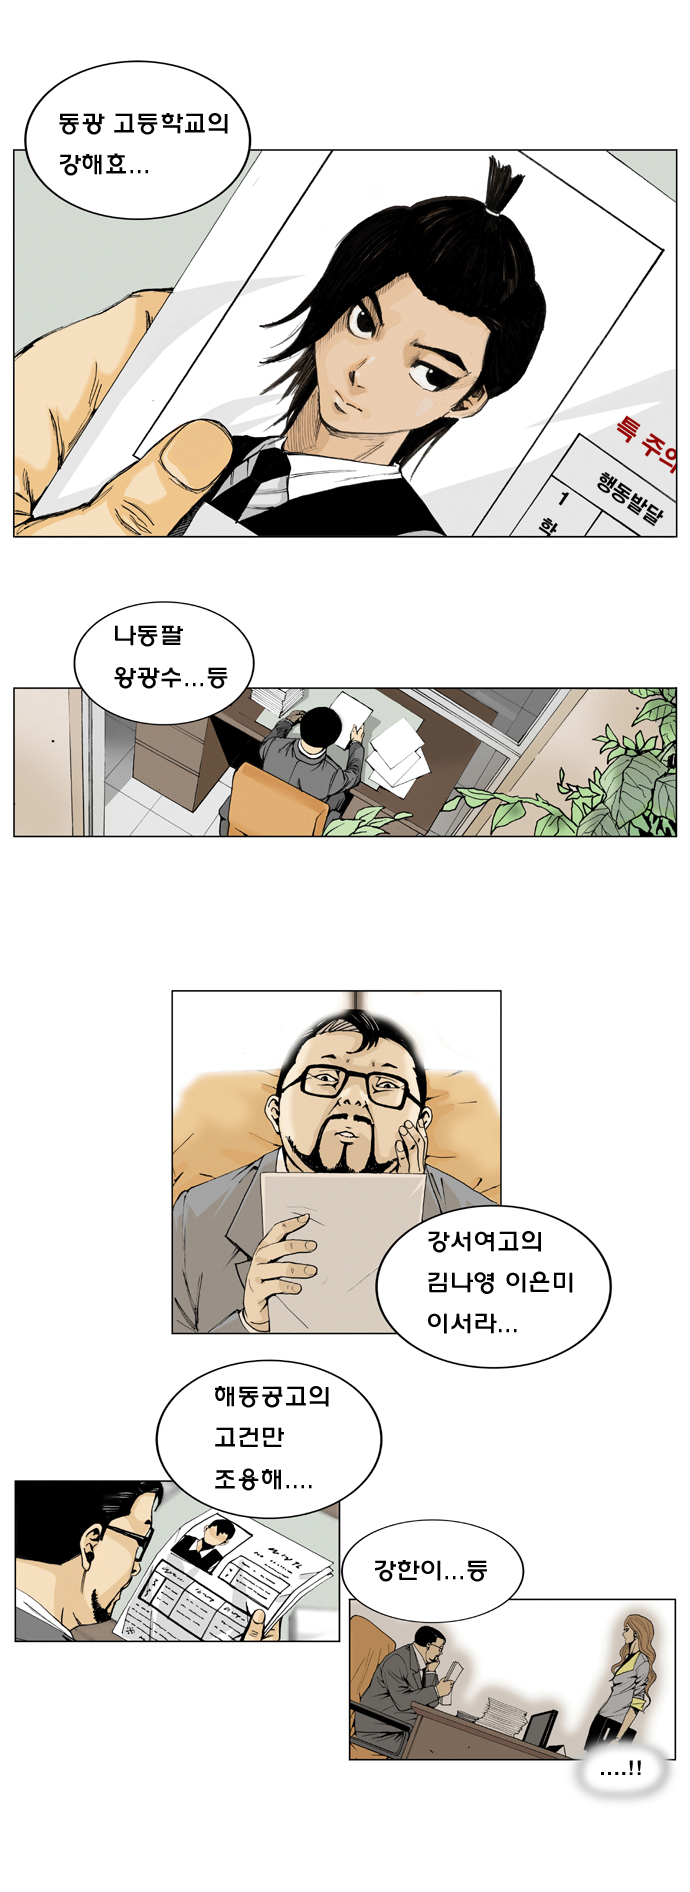 Ultimate Legend - Kang Hae Hyo - Chapter 1 - Page 2